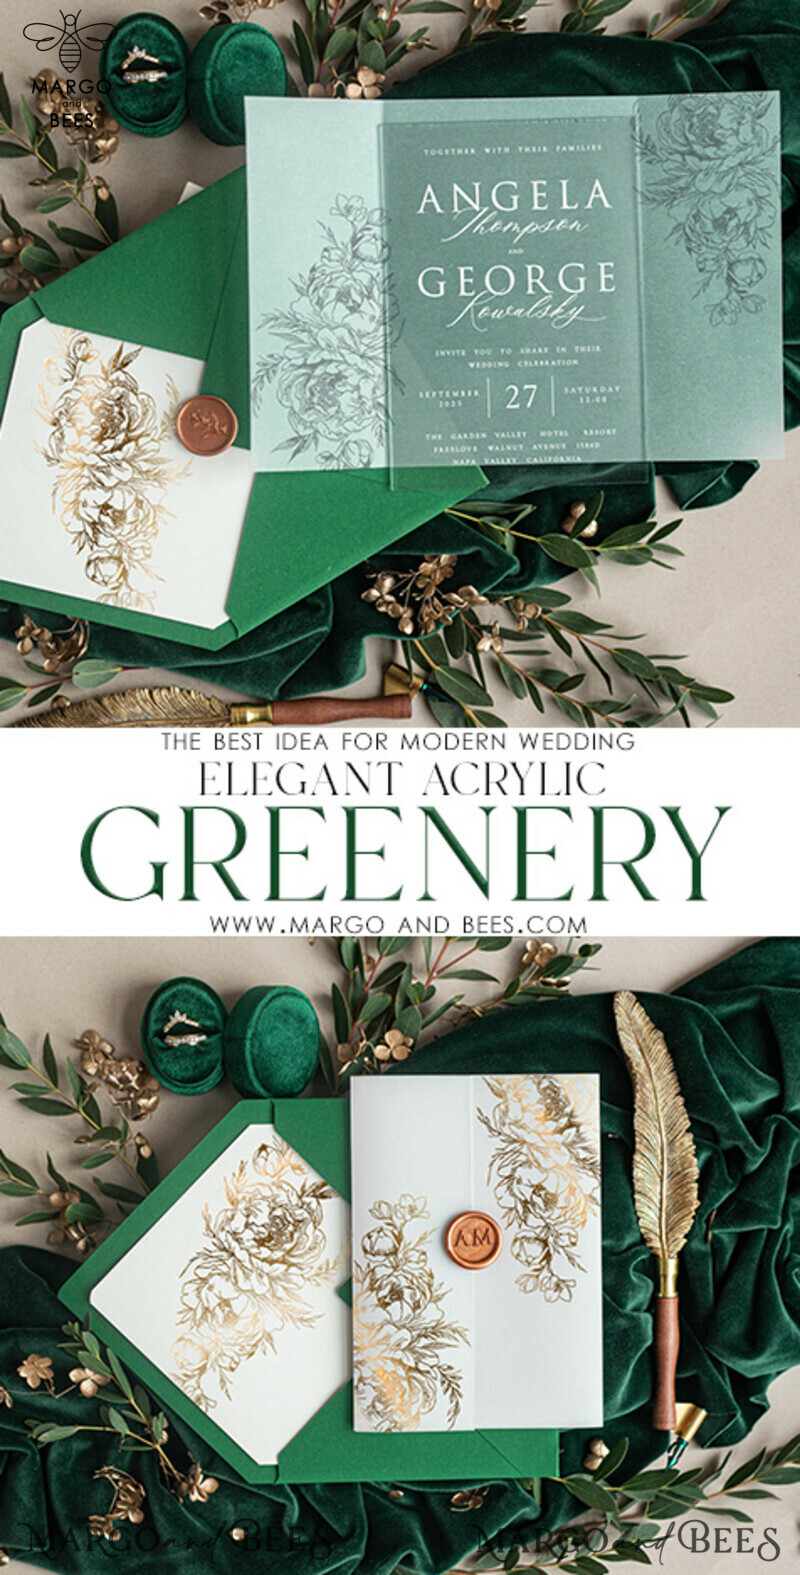 Greenery Gold Wedding Invitations: Glamour Acrylic with Glitter Emerald Green Suite, Luxury Cards featuring Wax Seal-2